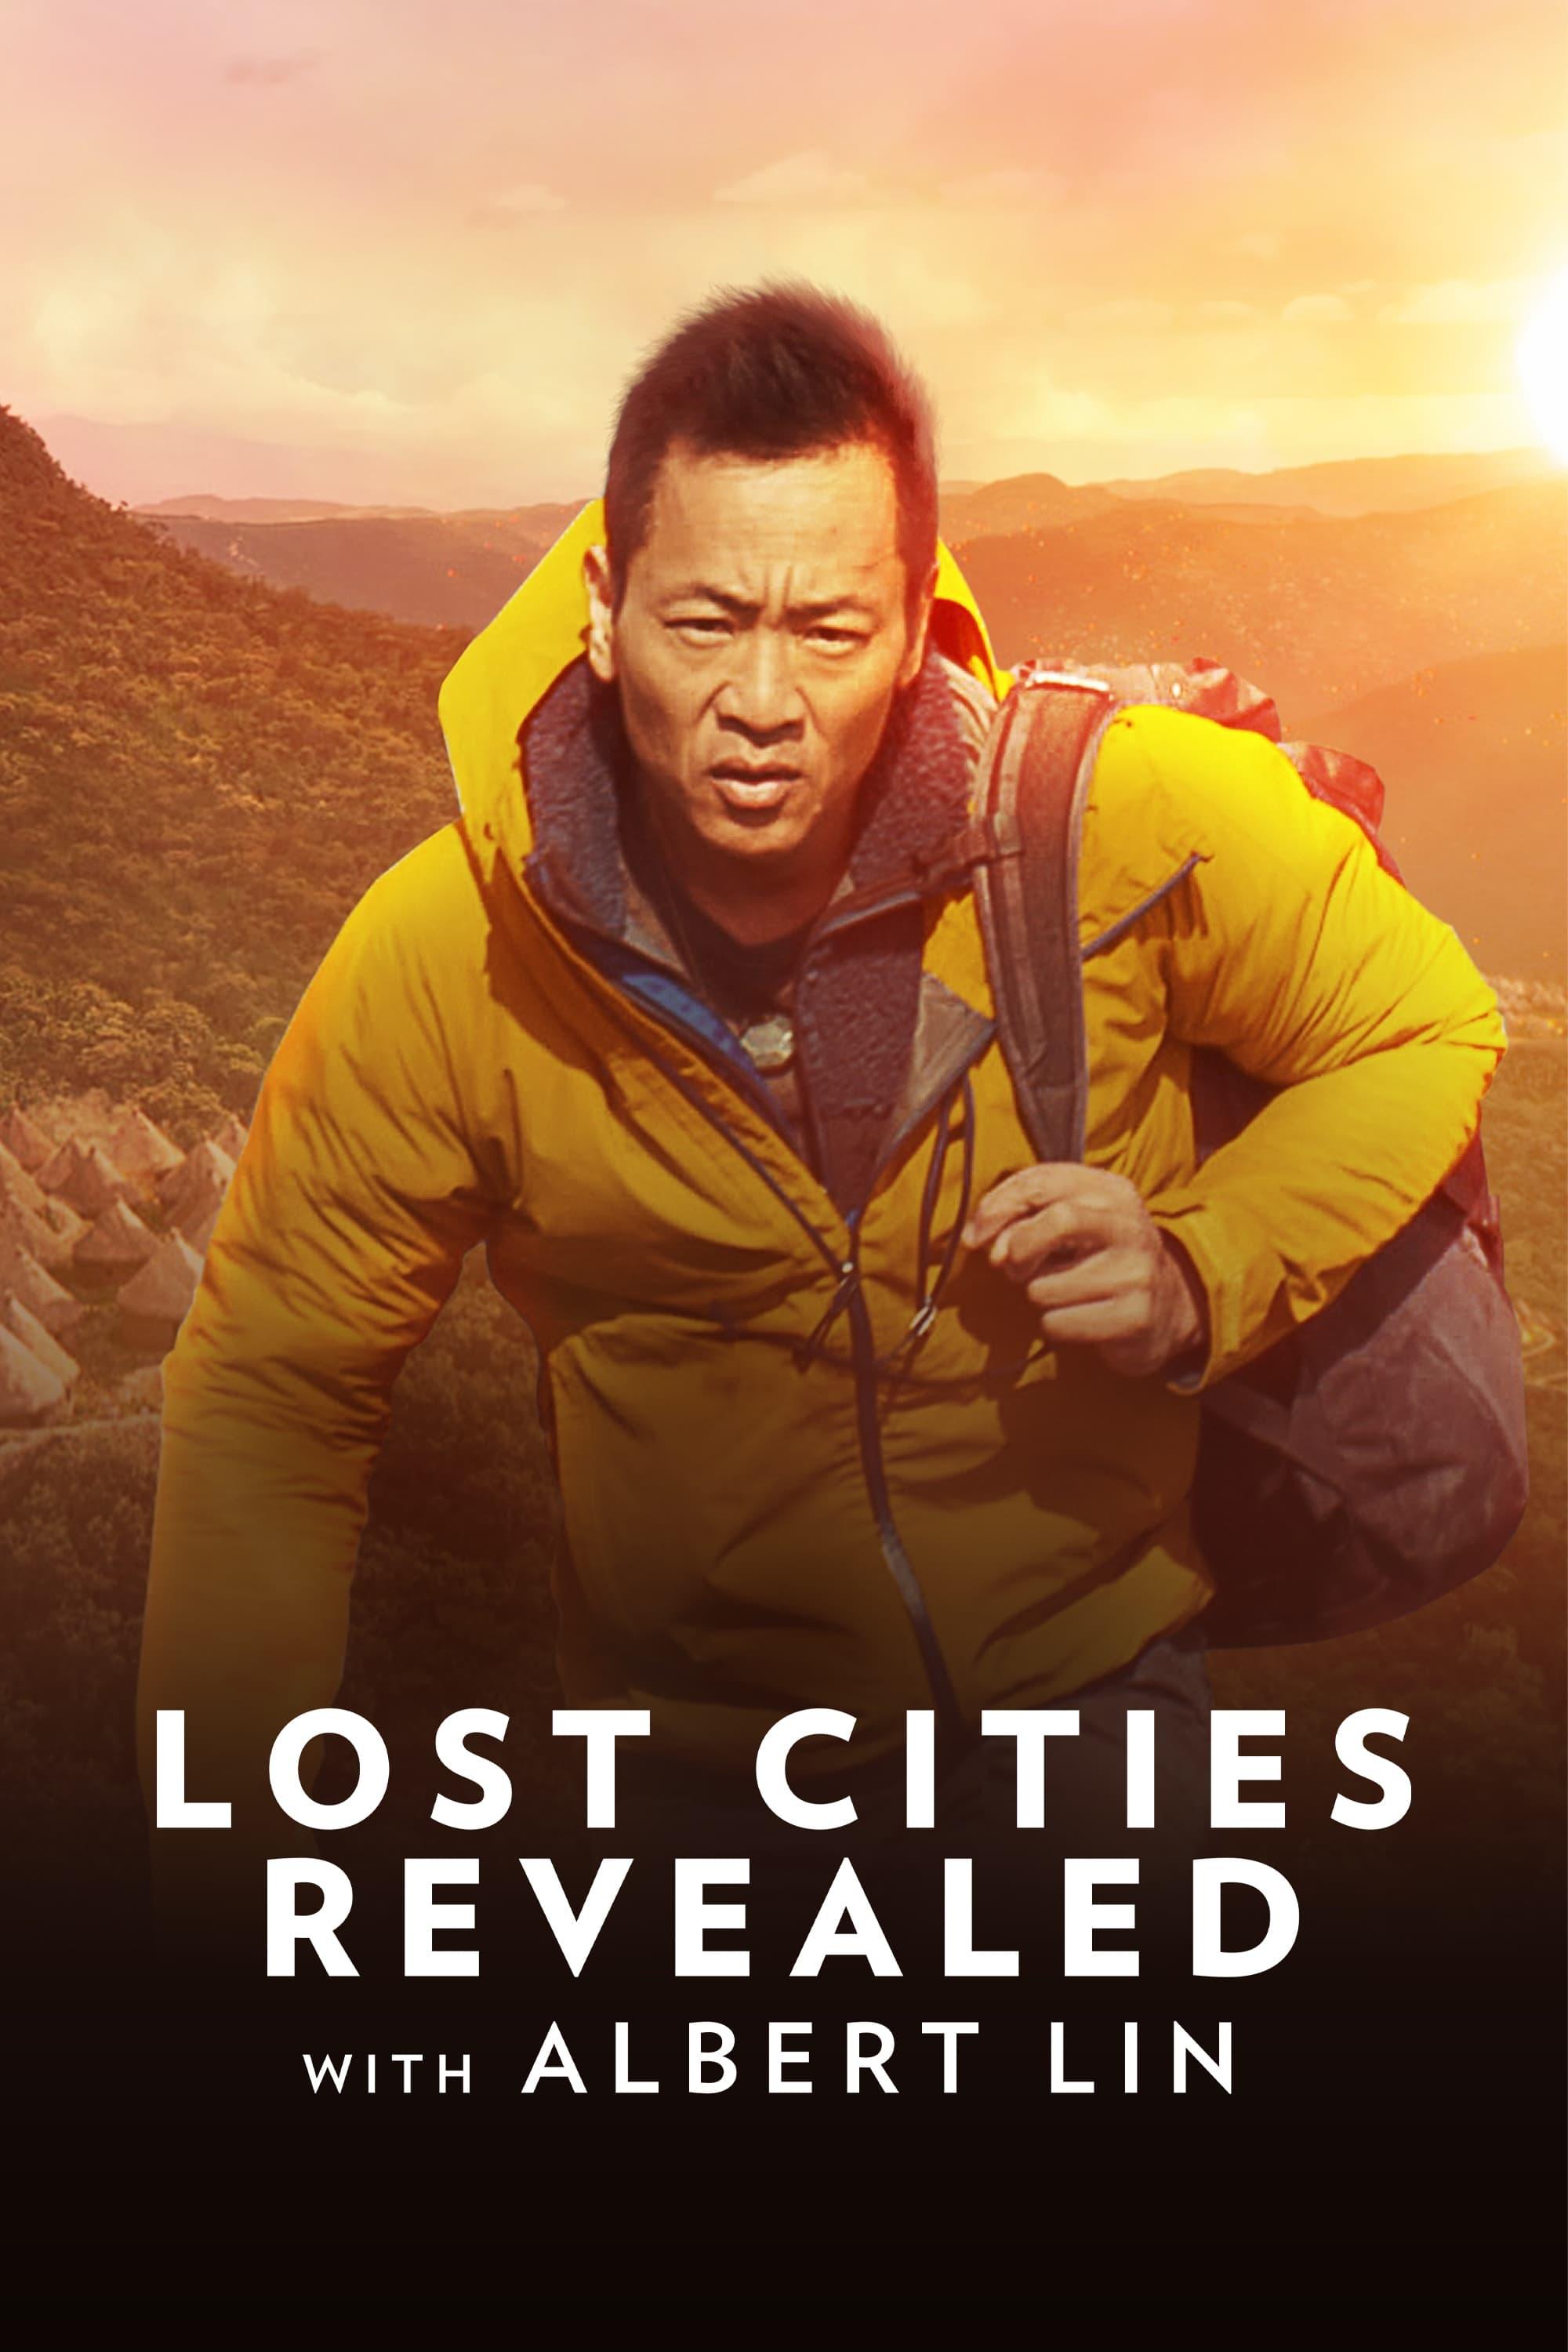 Lost Cities Revealed with Albert Lin poster